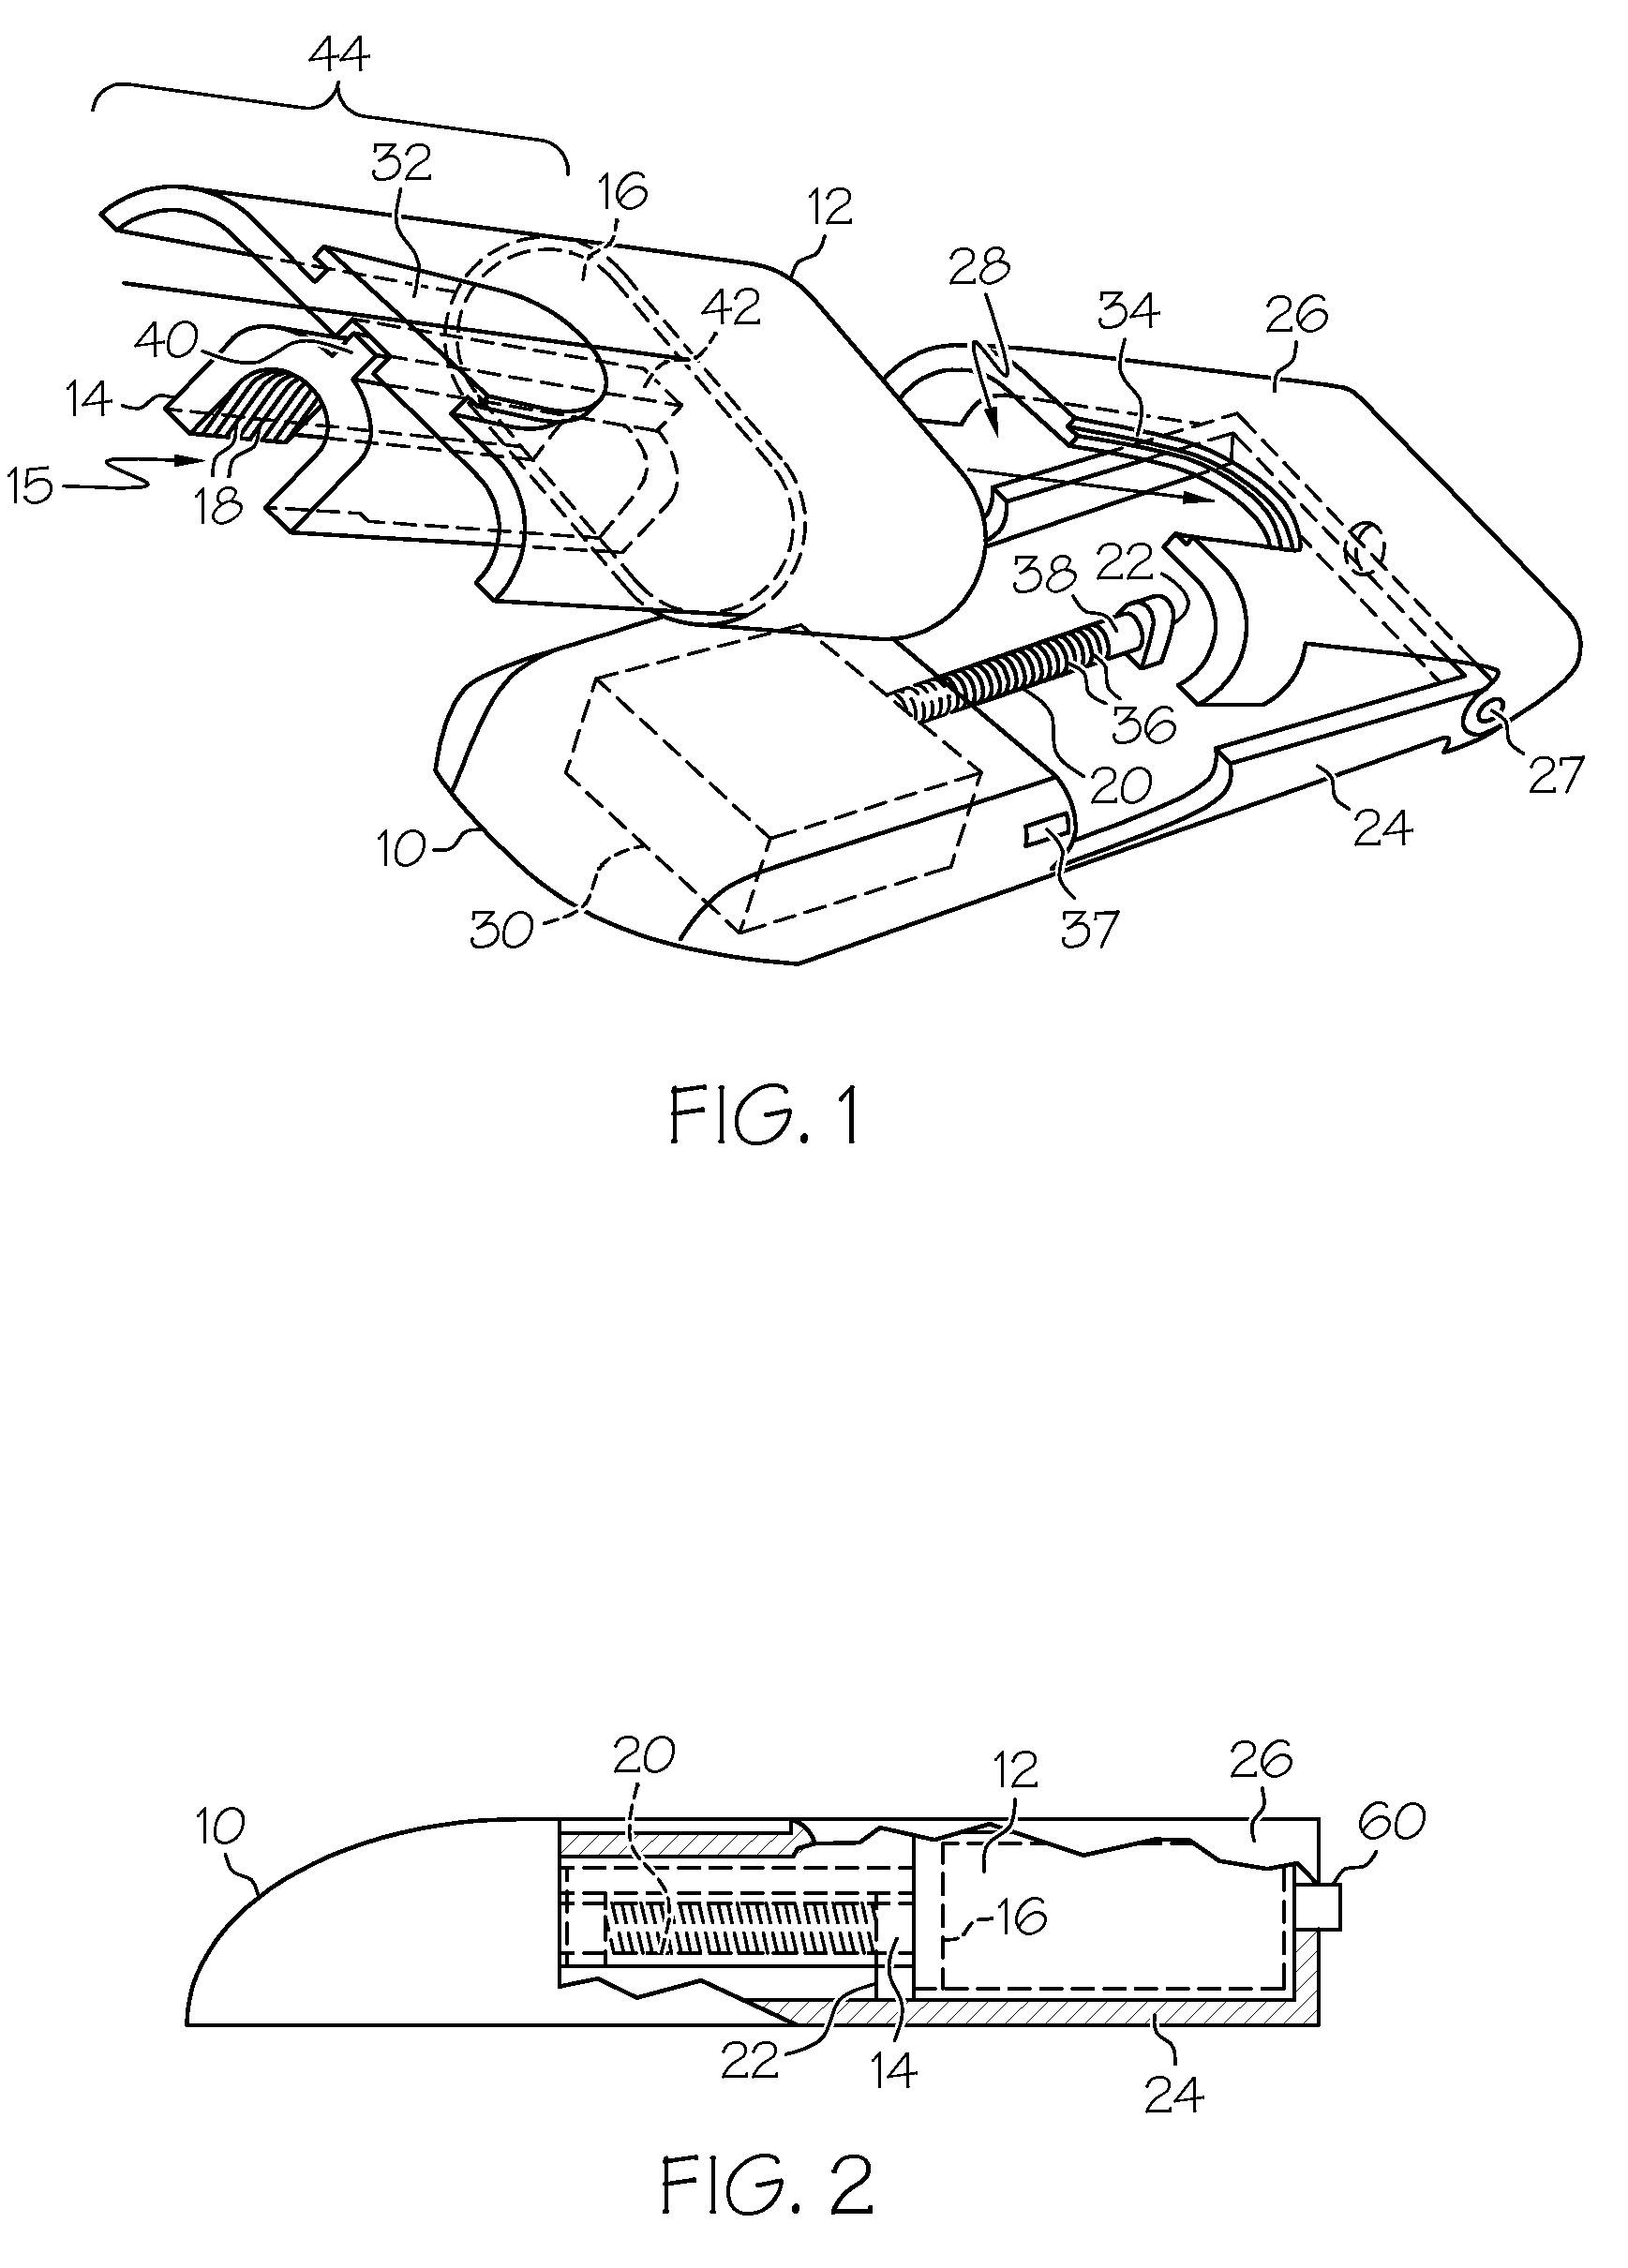 Drug reservoir loading and unloading mechanism for a drug delivery device using a unidirectional rotated shaft